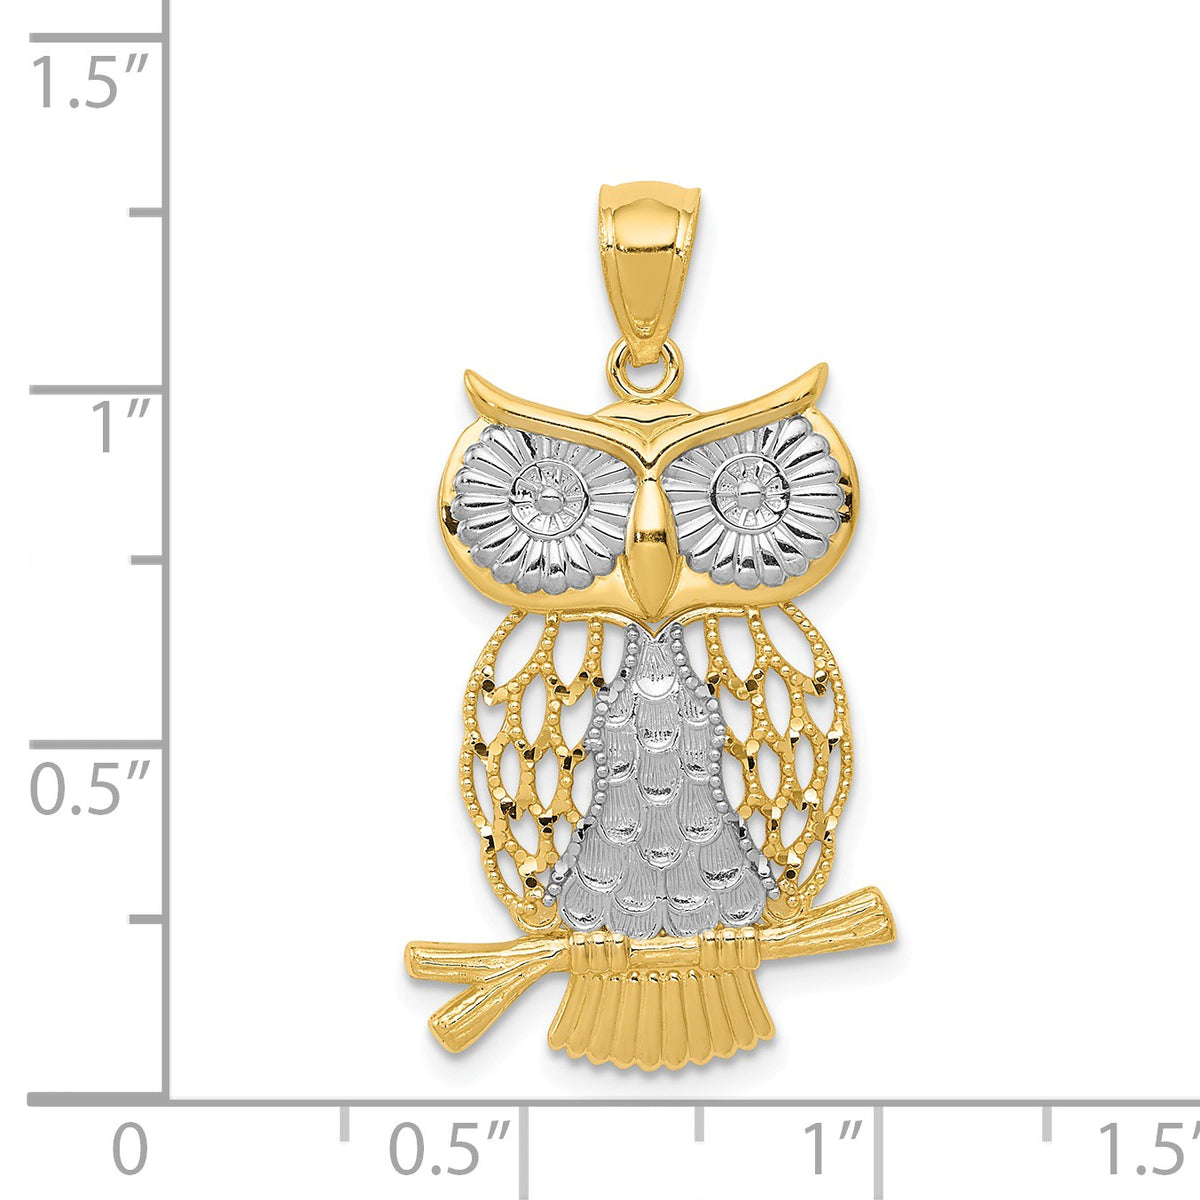 Alternate view of the 14k Yellow Gold &amp; White Rhodium Moveable Owl Pendant, 17mm (5/8 inch) by The Black Bow Jewelry Co.